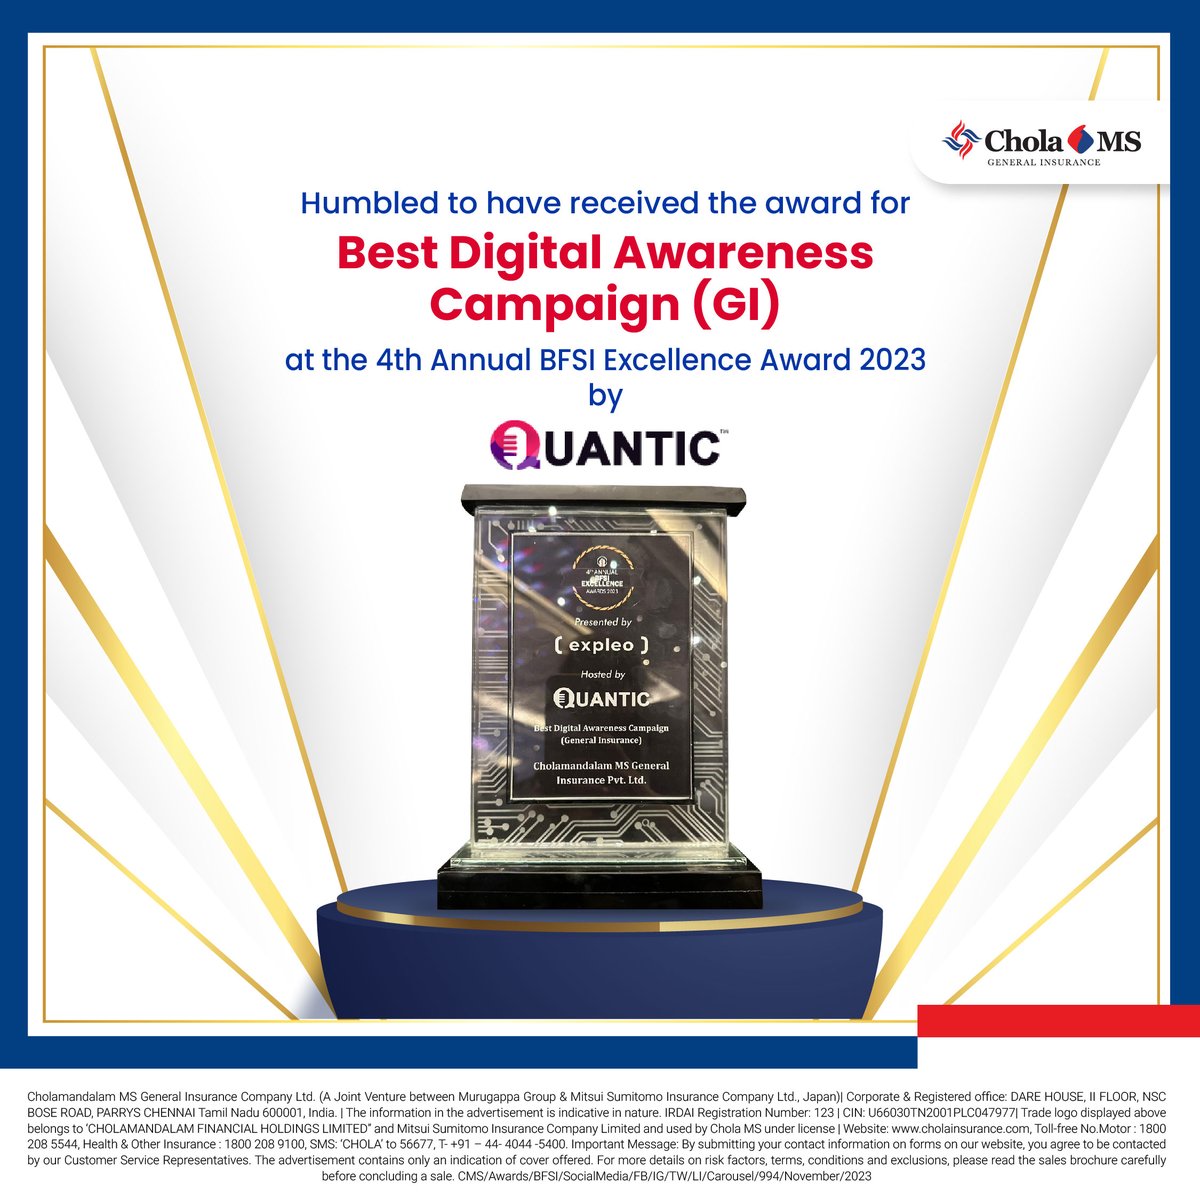 We are proud to be recognized for empowering the digital generation at the Awards Ceremony of 4th Annual BFSI Excellence Awards 2023. 

We are grateful for your unwavering support and faith in us!

#CholaMS #StayProtected #StayInsured #DigitalAwareness